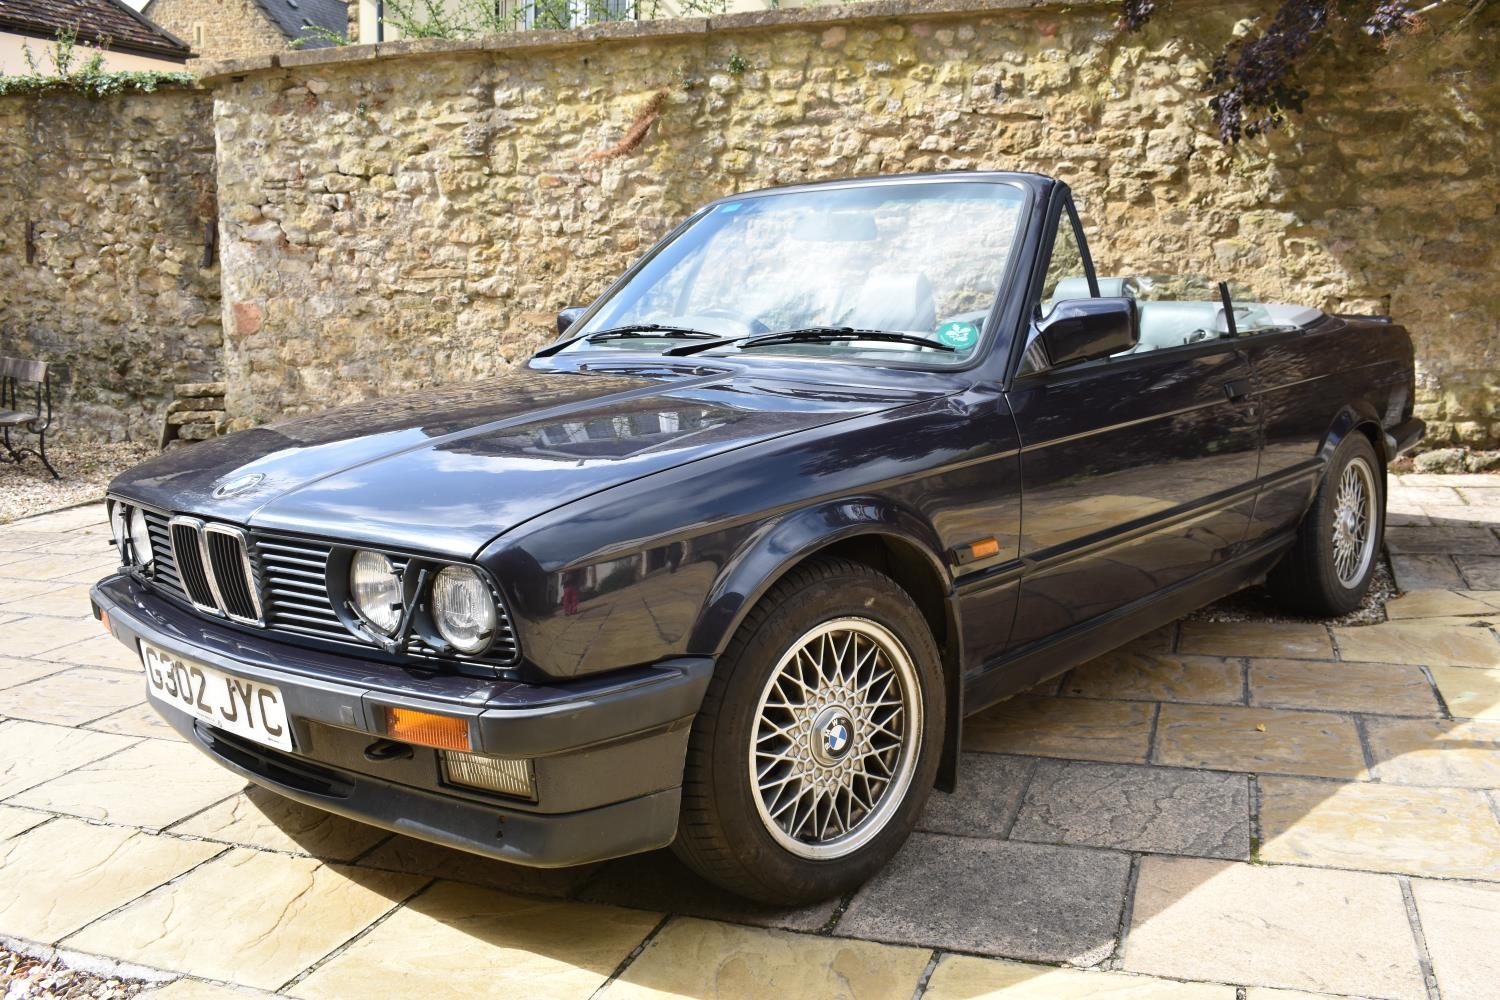 A 1989 Bmw 325I (E30) Cabriolet M Sport Automatic, Registration Number G302  Jyc, Chassis Number Wbab